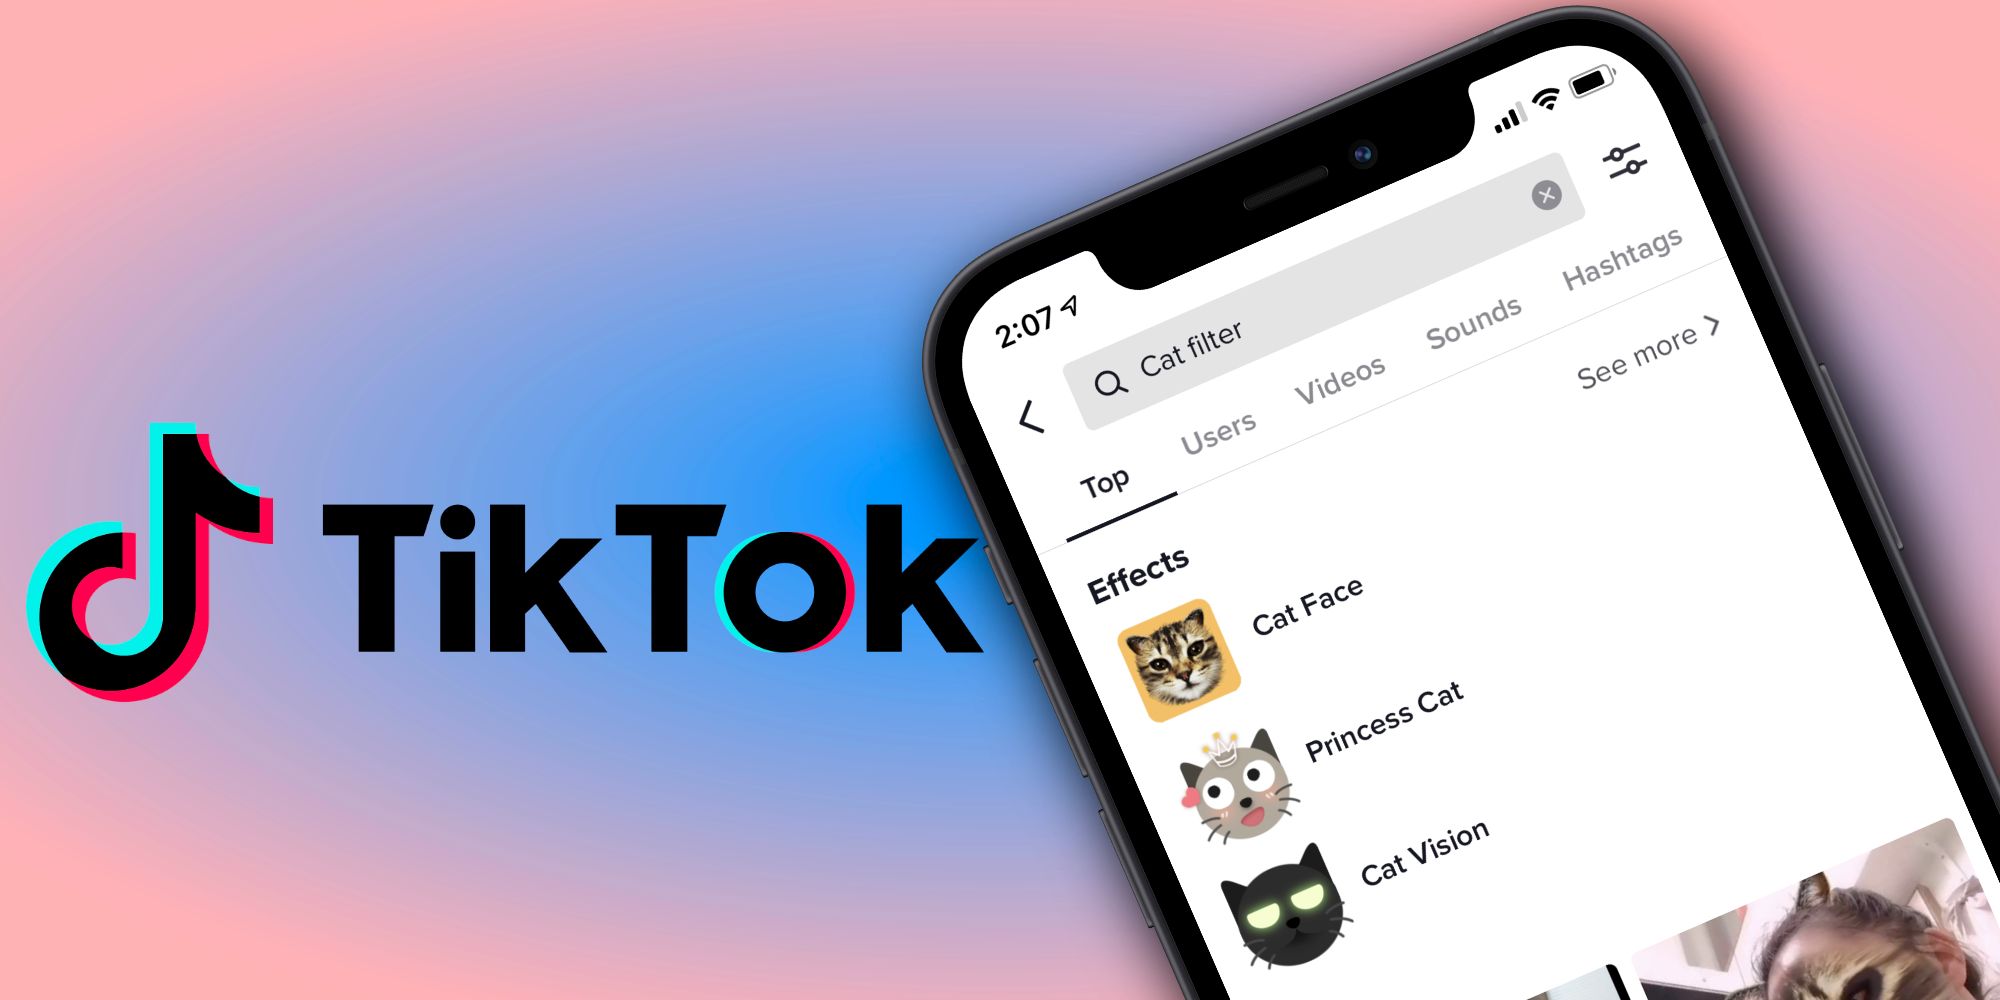 Searching for filters in TikTok app